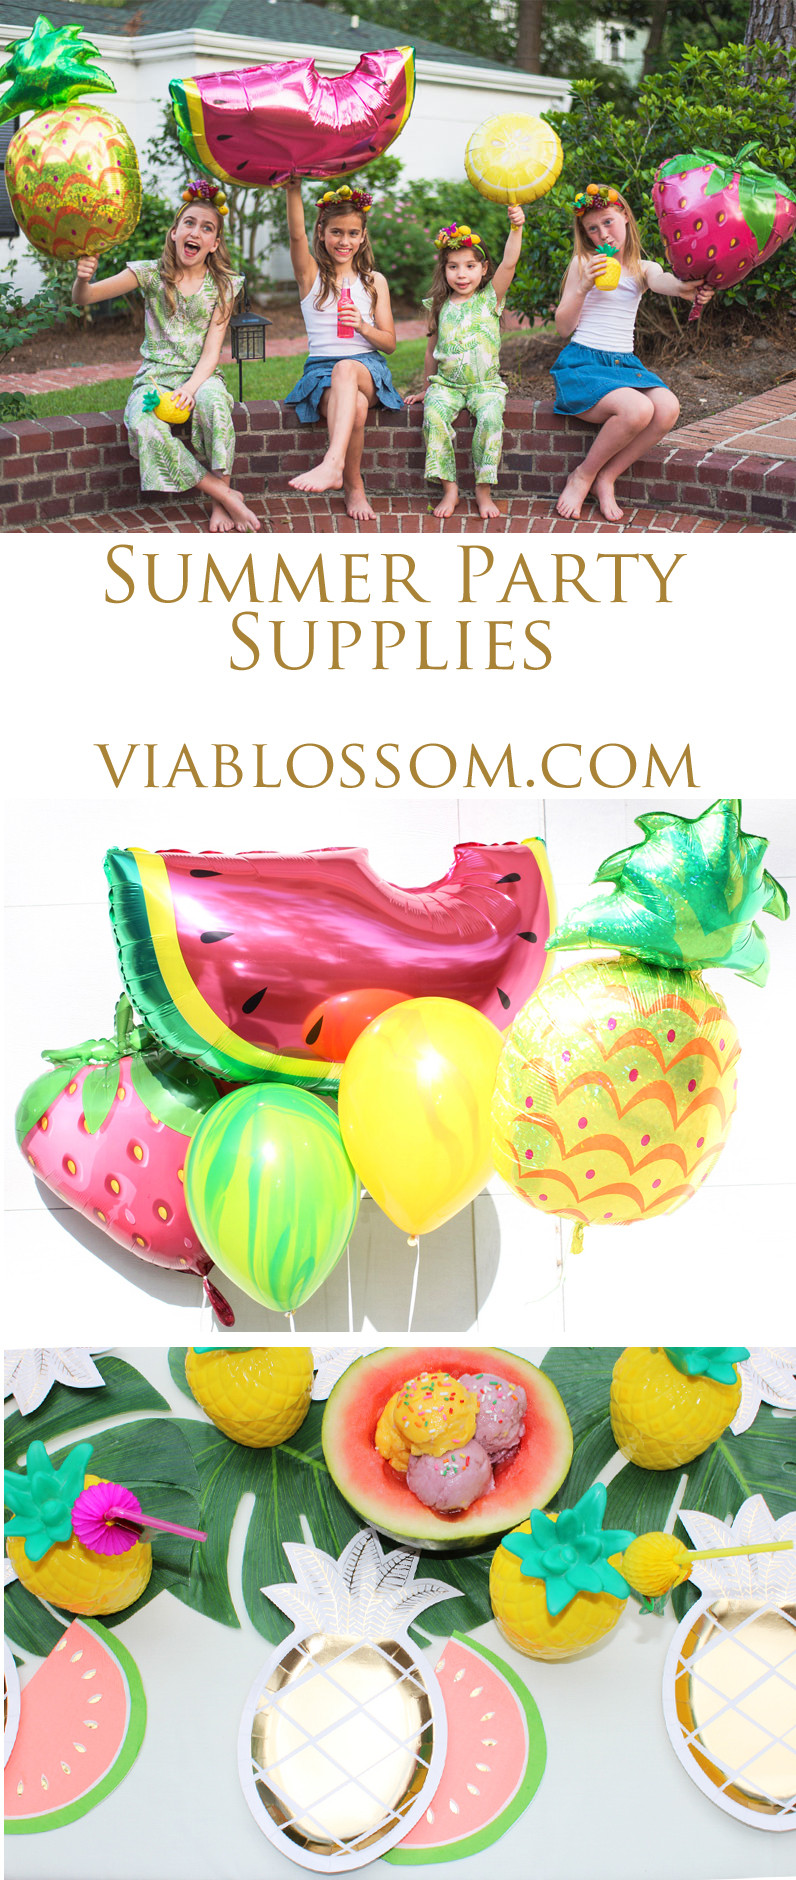 Summer Birthday Party Favor Ideas
 Must Have Summer Party Supplies Via Blossom